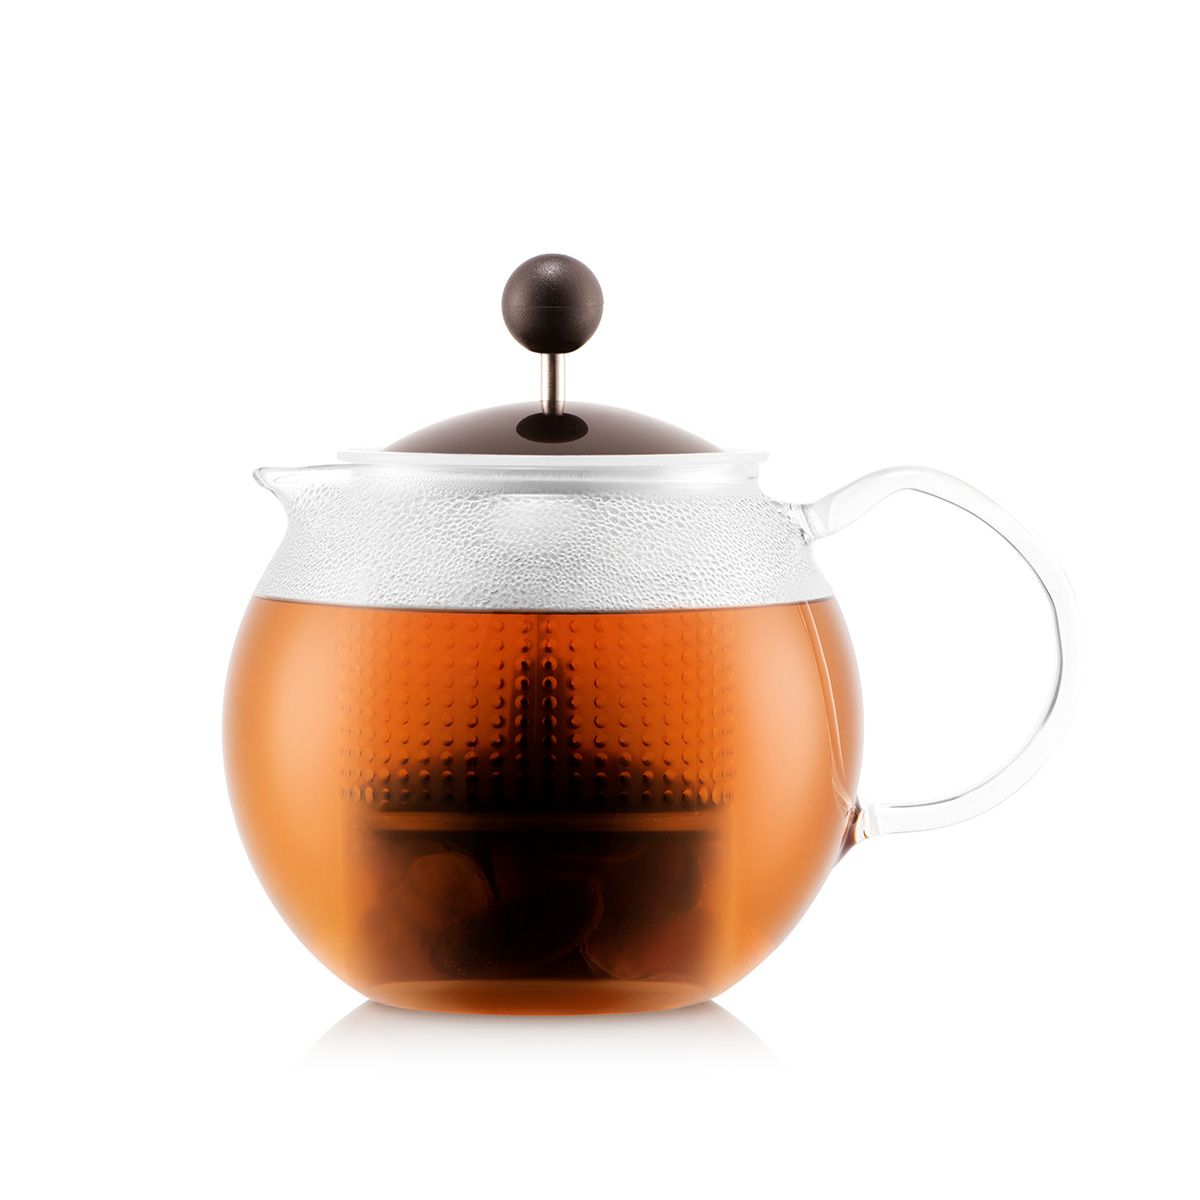 Berlin Tea Company - A good tea pot is hard to find. @bodum makes this one  they call Assam. We can attest to the quality and functionality of it. If  you're looking